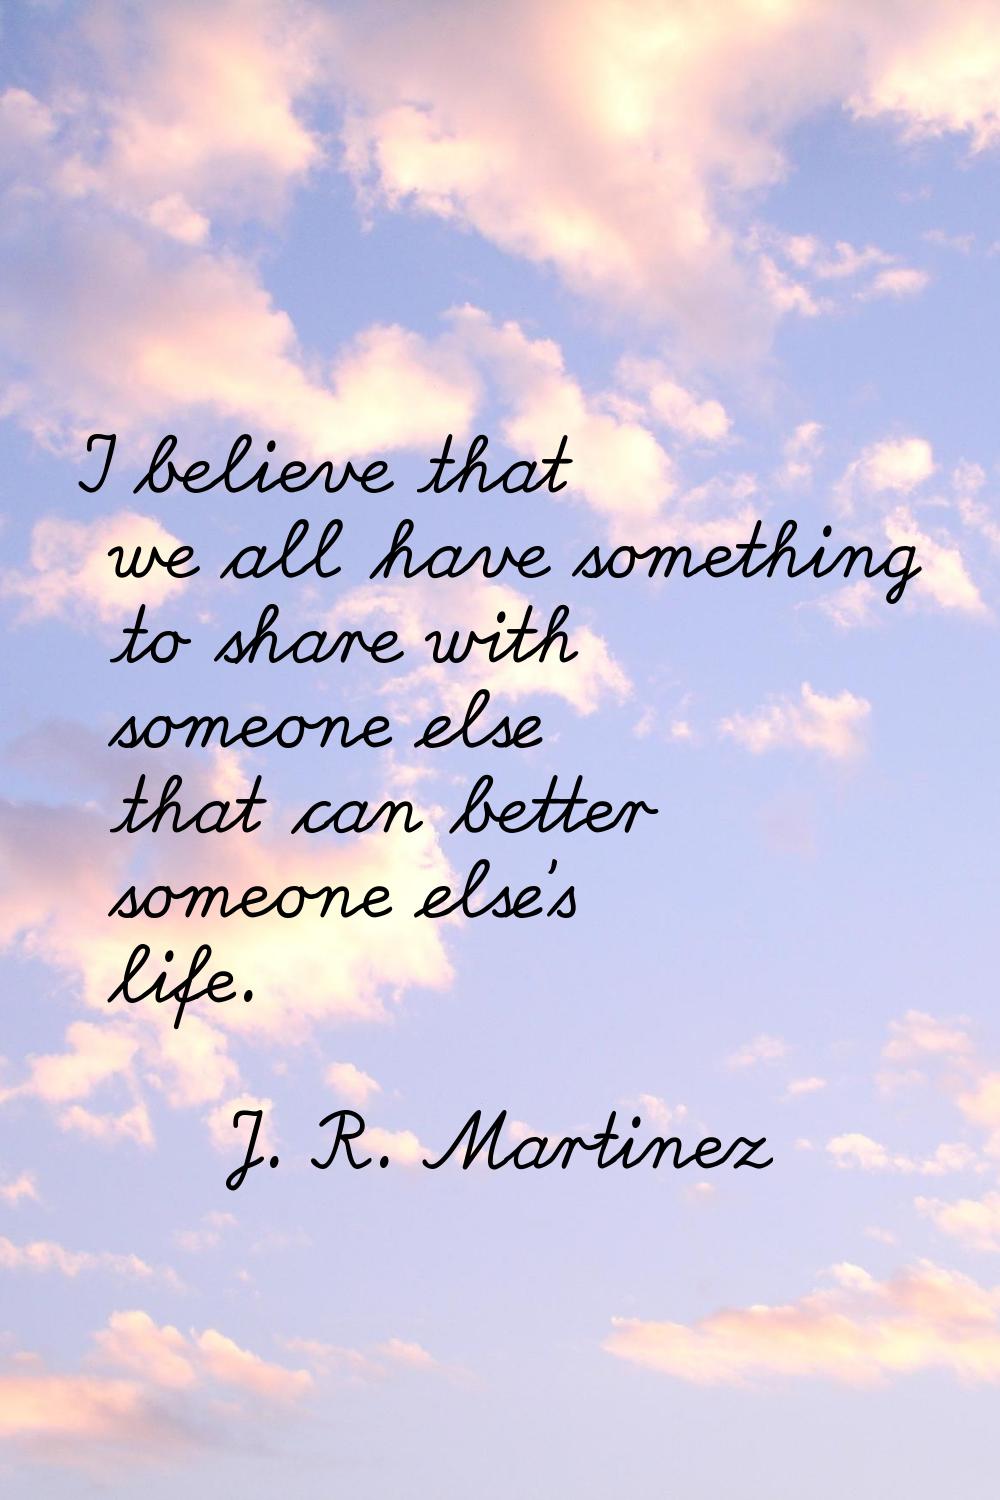 I believe that we all have something to share with someone else that can better someone else's life